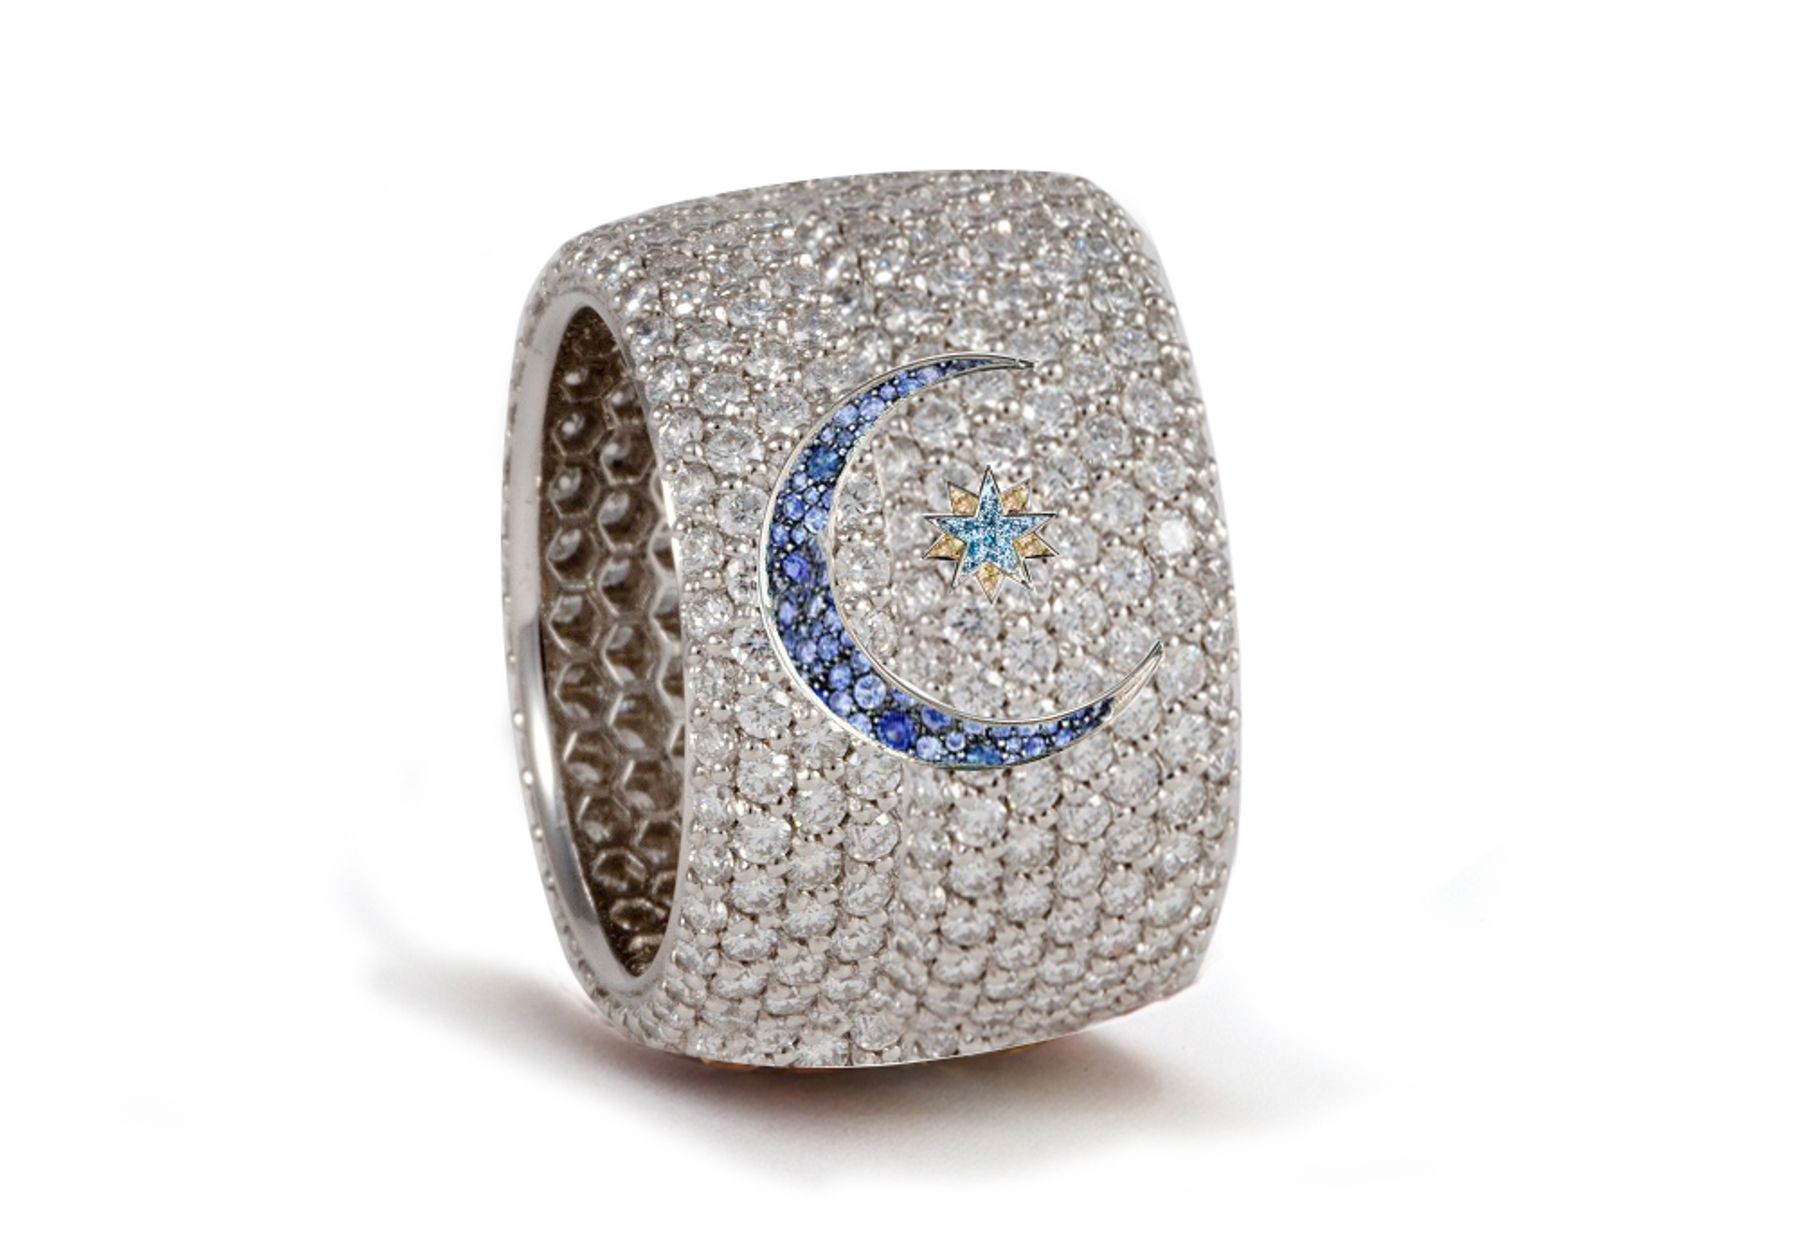 Delicate French pavee Sparkling Brilliant-Cut Round Diamonds & Vivid Multi-Colored Precious Stones Eternity Rings & Bands Featuring Celestial Moon & Stars